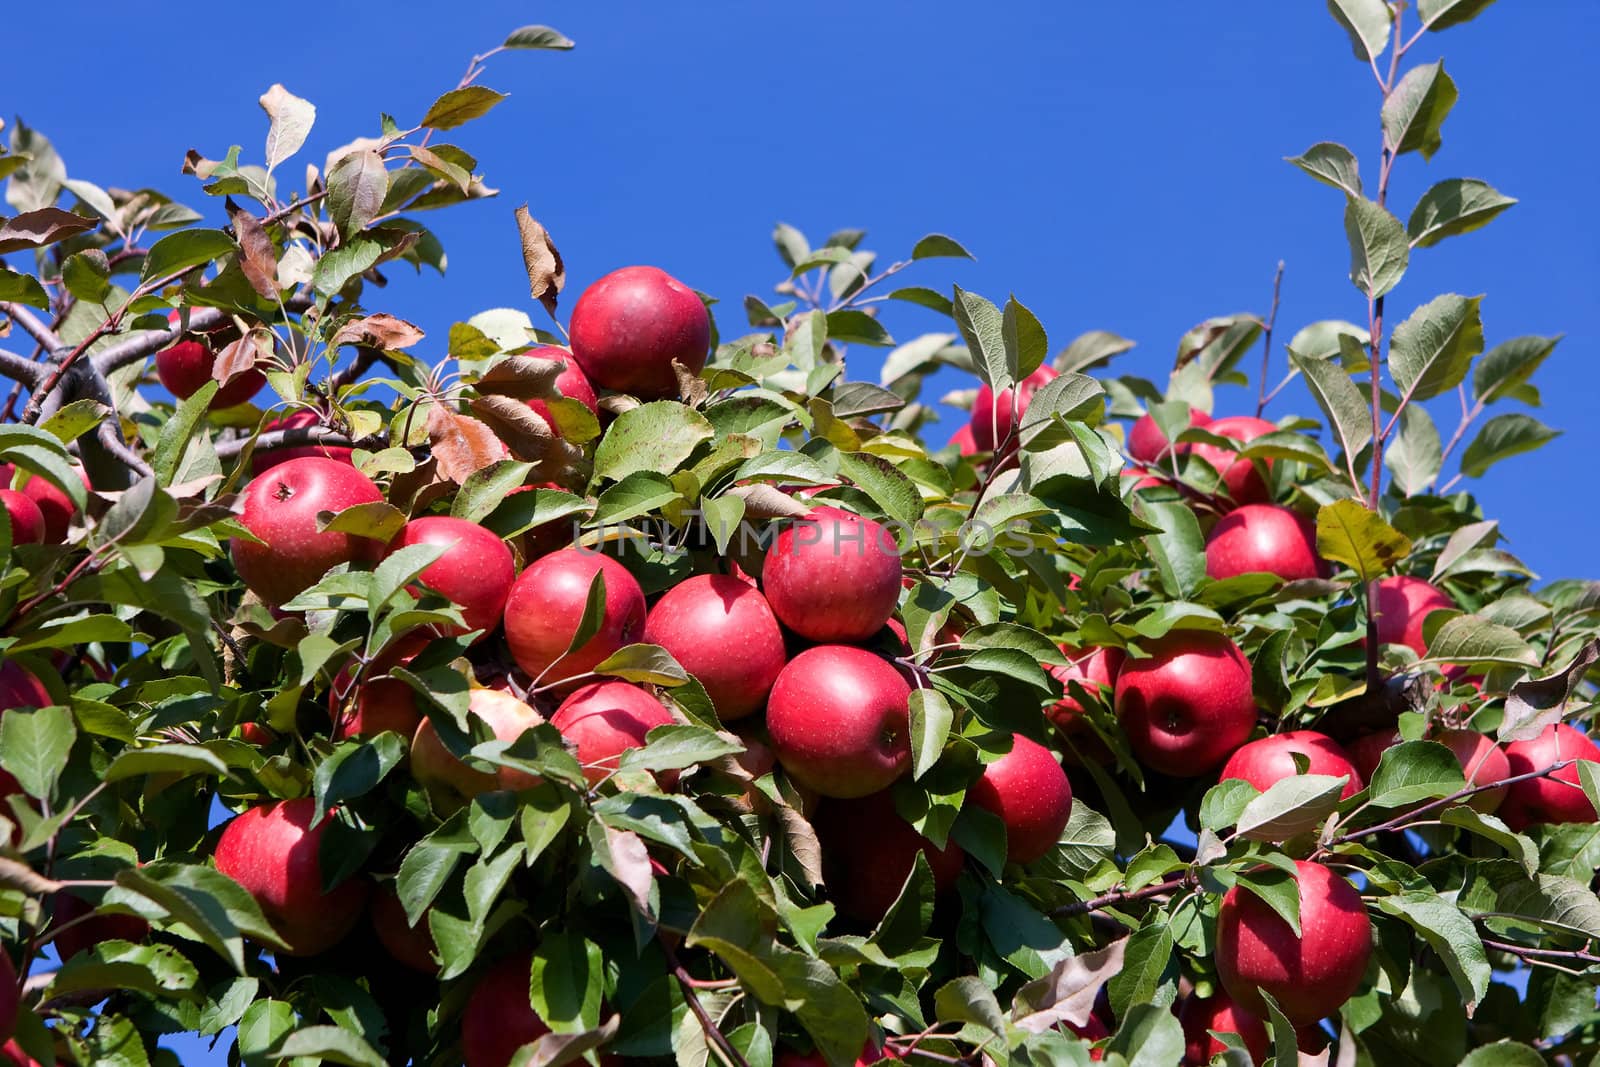 Background of a Branch with red apples against blue sky.
